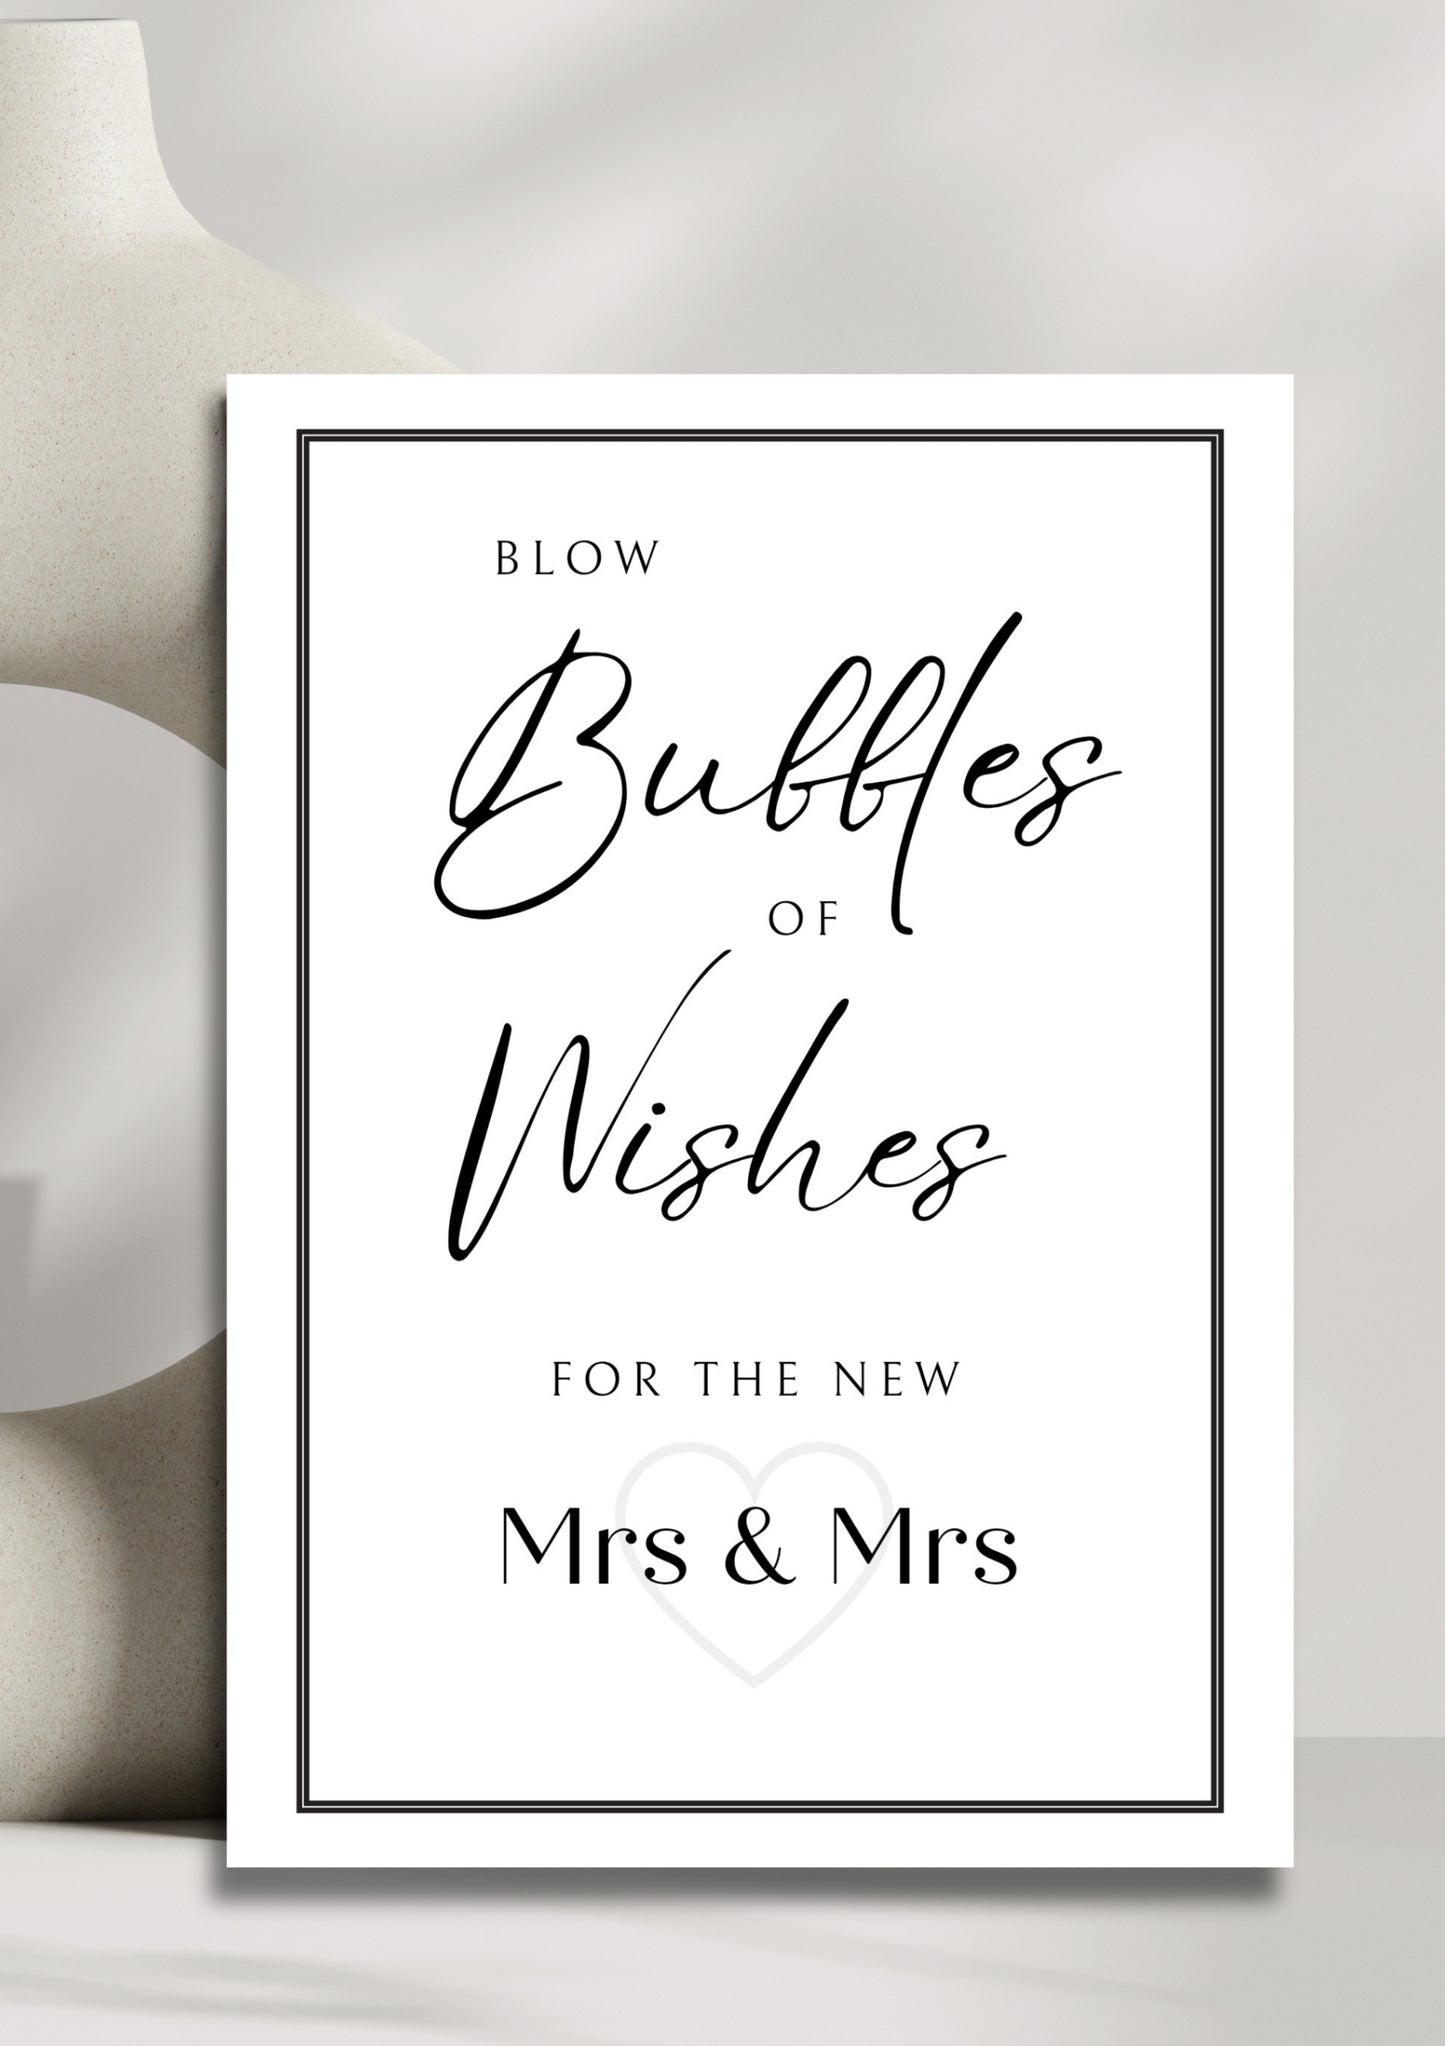 White stone collection - Bubbles (Mrs & Mrs)